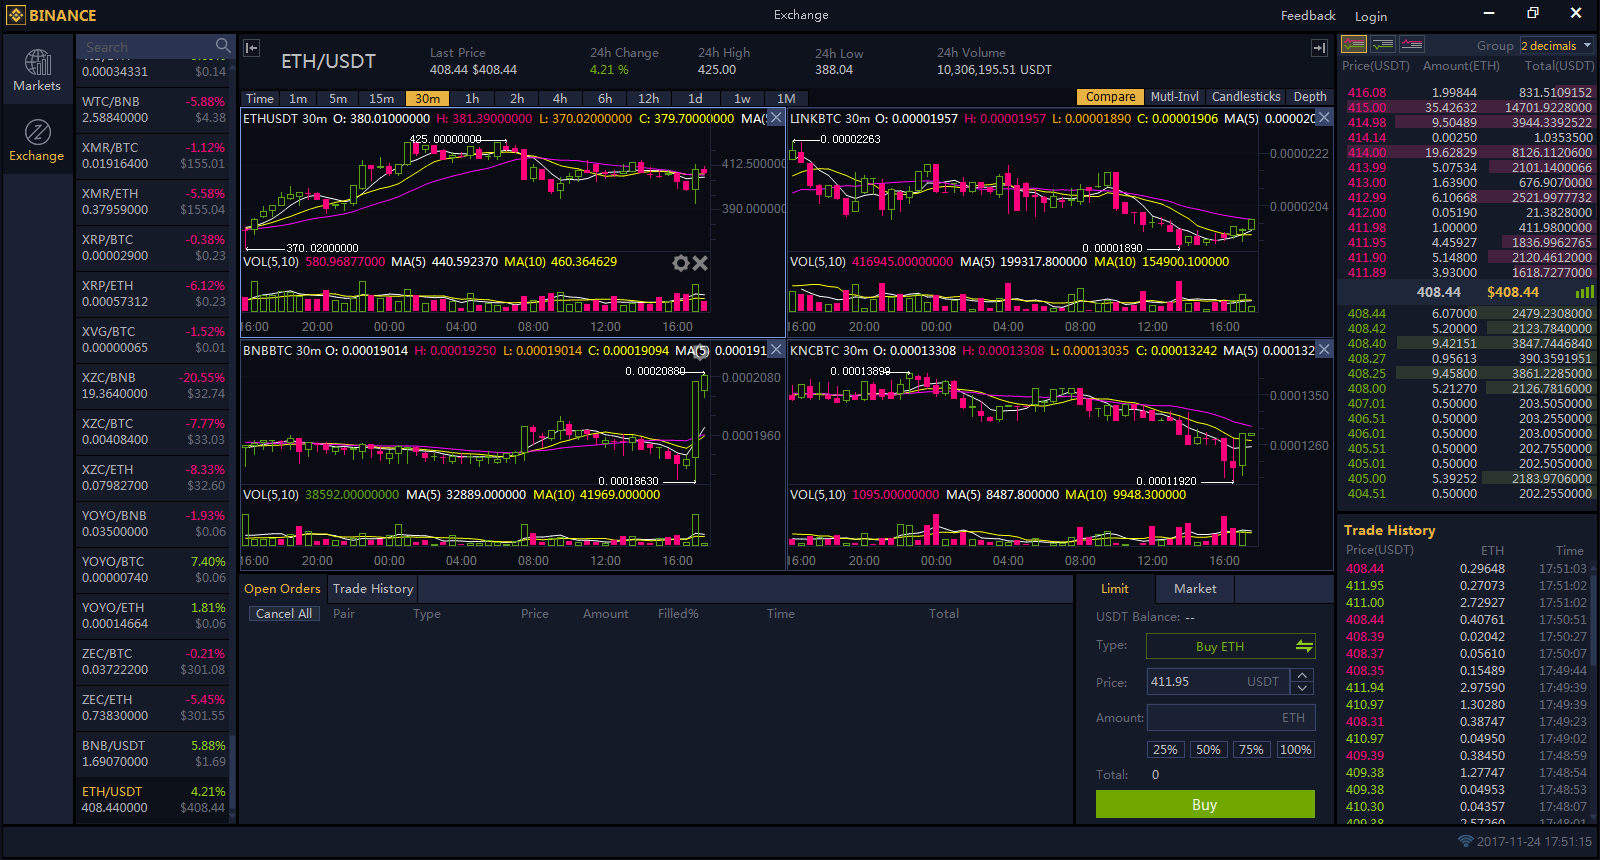 The free official Mac OS version of Binance